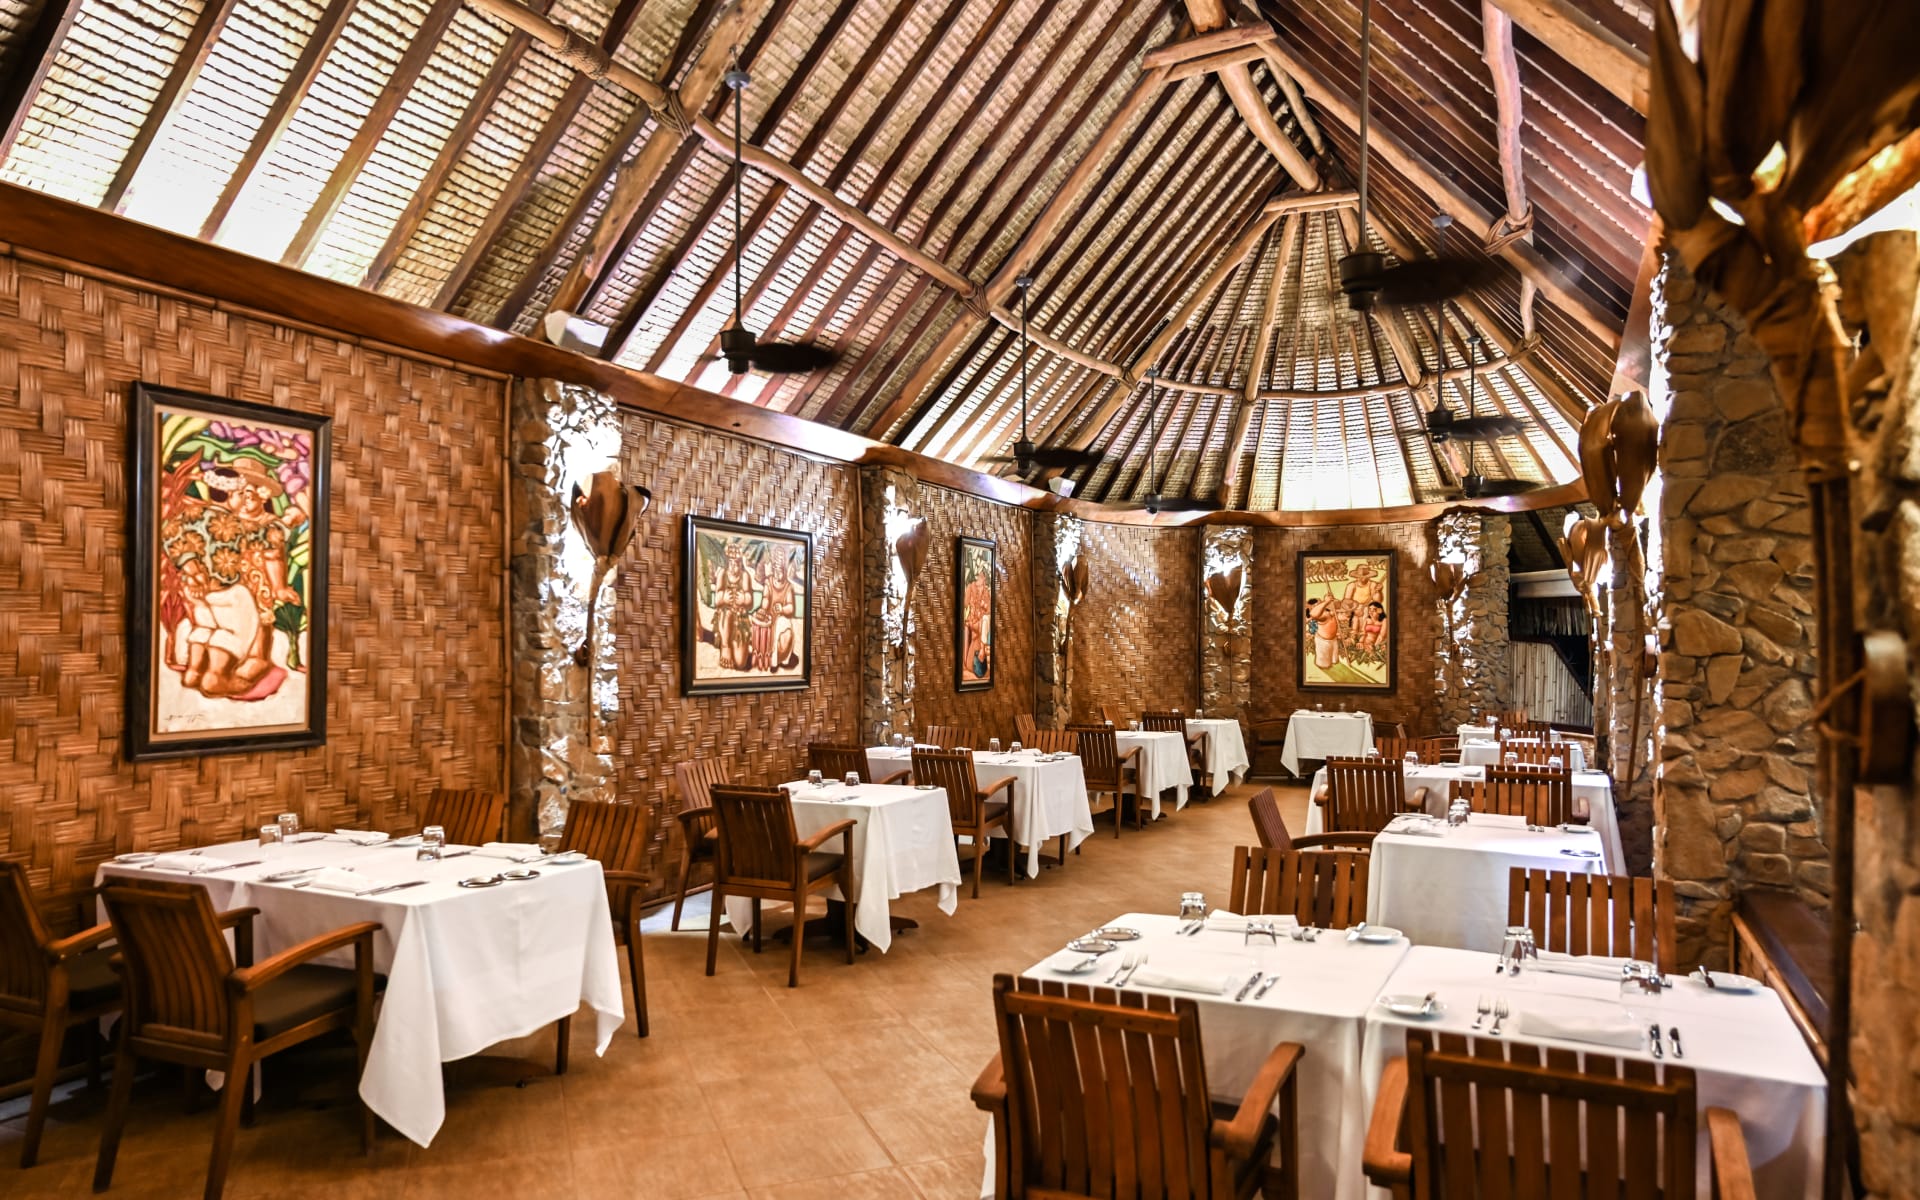 Gorgeous fine dining restaurant in traditional building